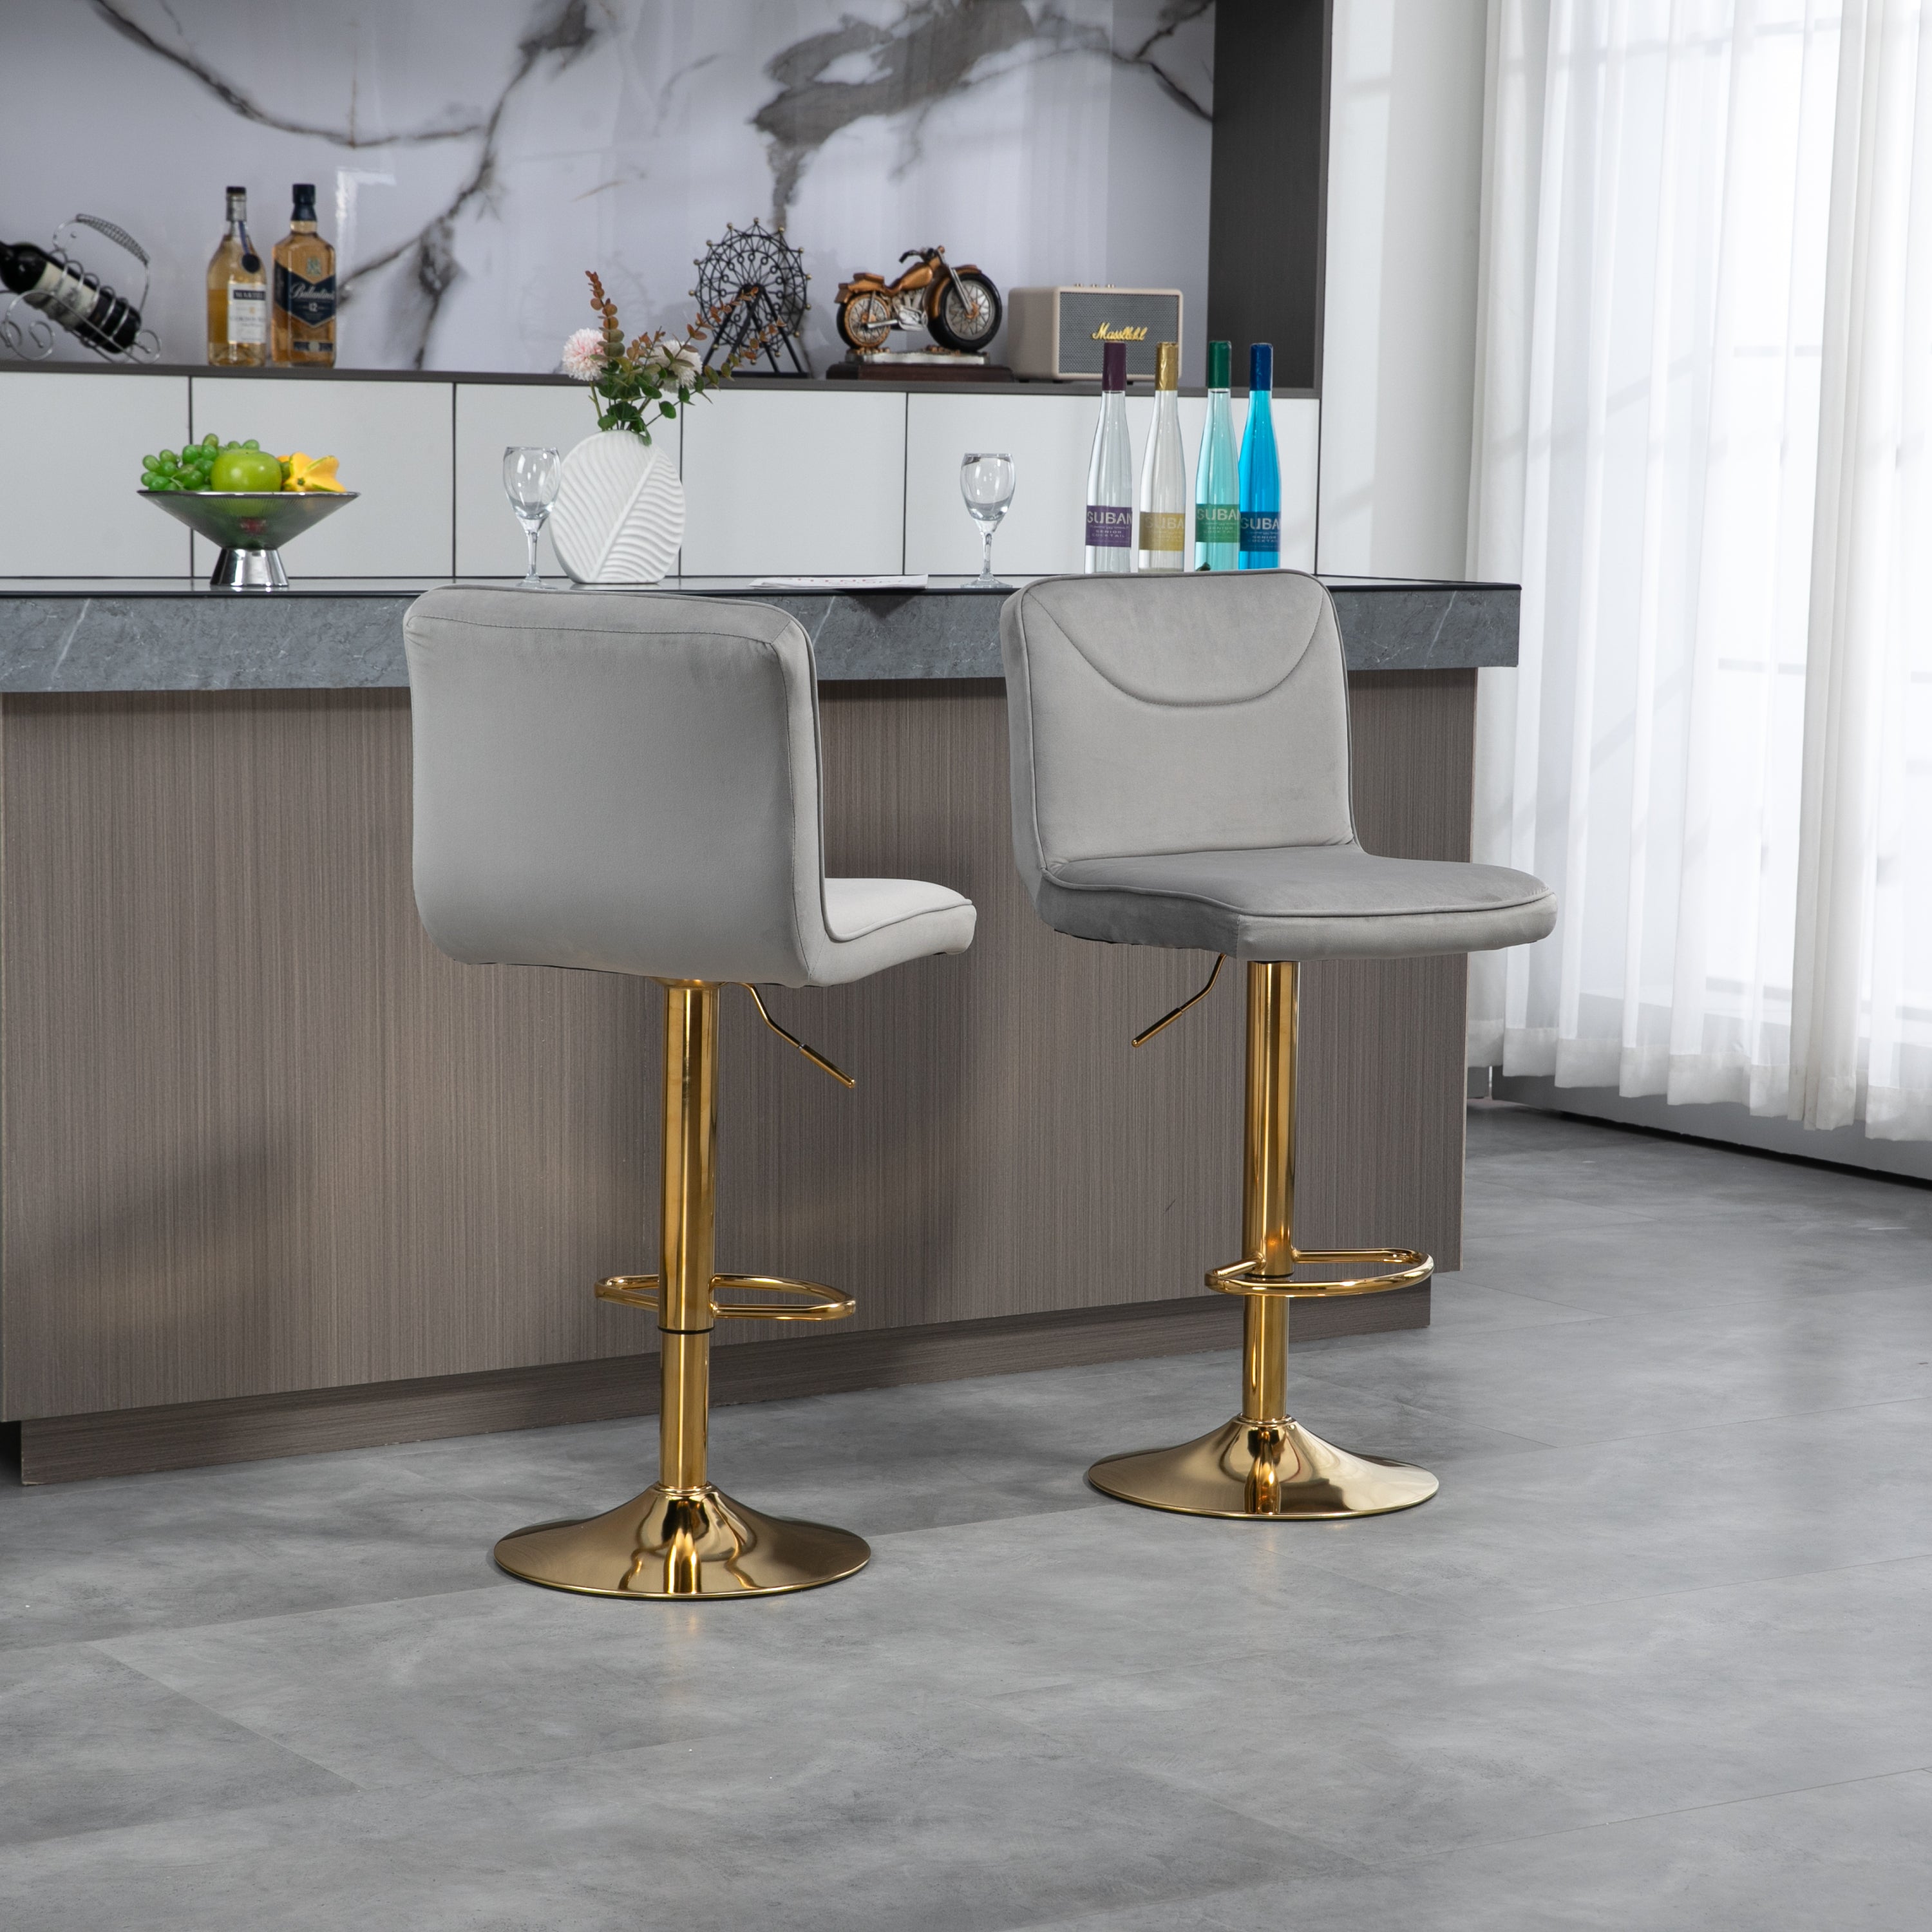 🆓🚛 Modern Swivel Bar stools Set of 2, Adjustable Counter Height Bar Chairs, with Backrest Footrest, Golden Base, Gray